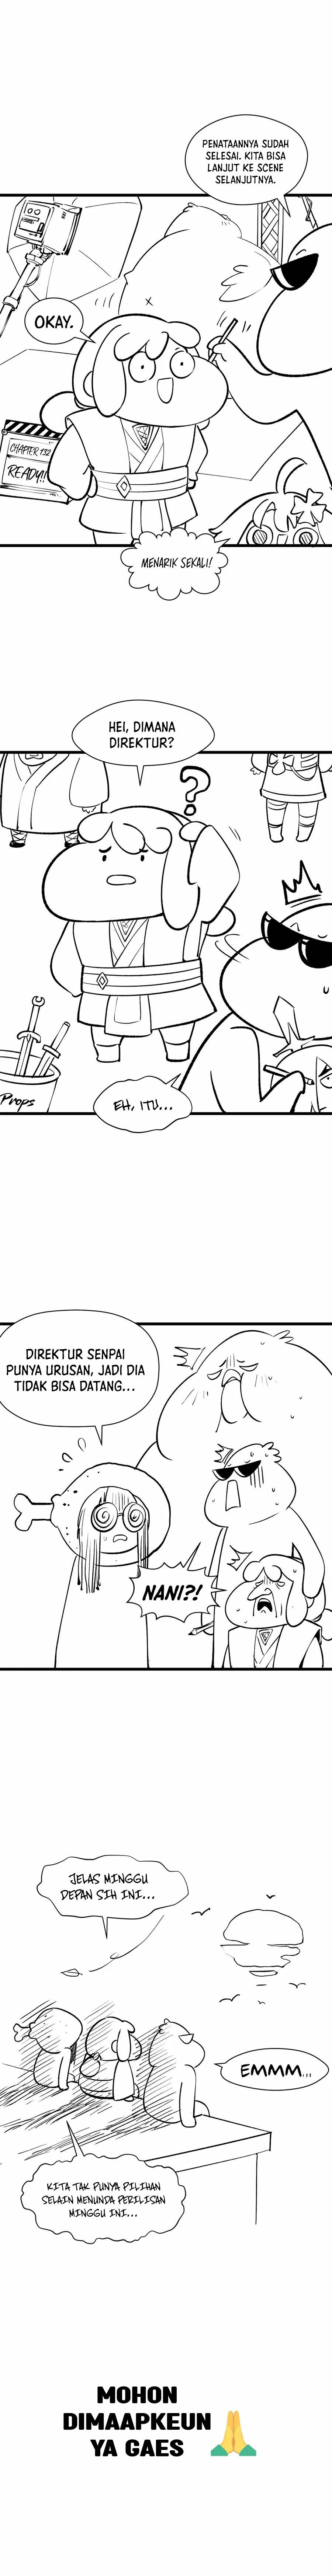 Dilarang COPAS - situs resmi www.mangacanblog.com - Komik top tier providence secretly cultivate for a thousand years 131 - chapter 131 132 Indonesia top tier providence secretly cultivate for a thousand years 131 - chapter 131 Terbaru 18|Baca Manga Komik Indonesia|Mangacan